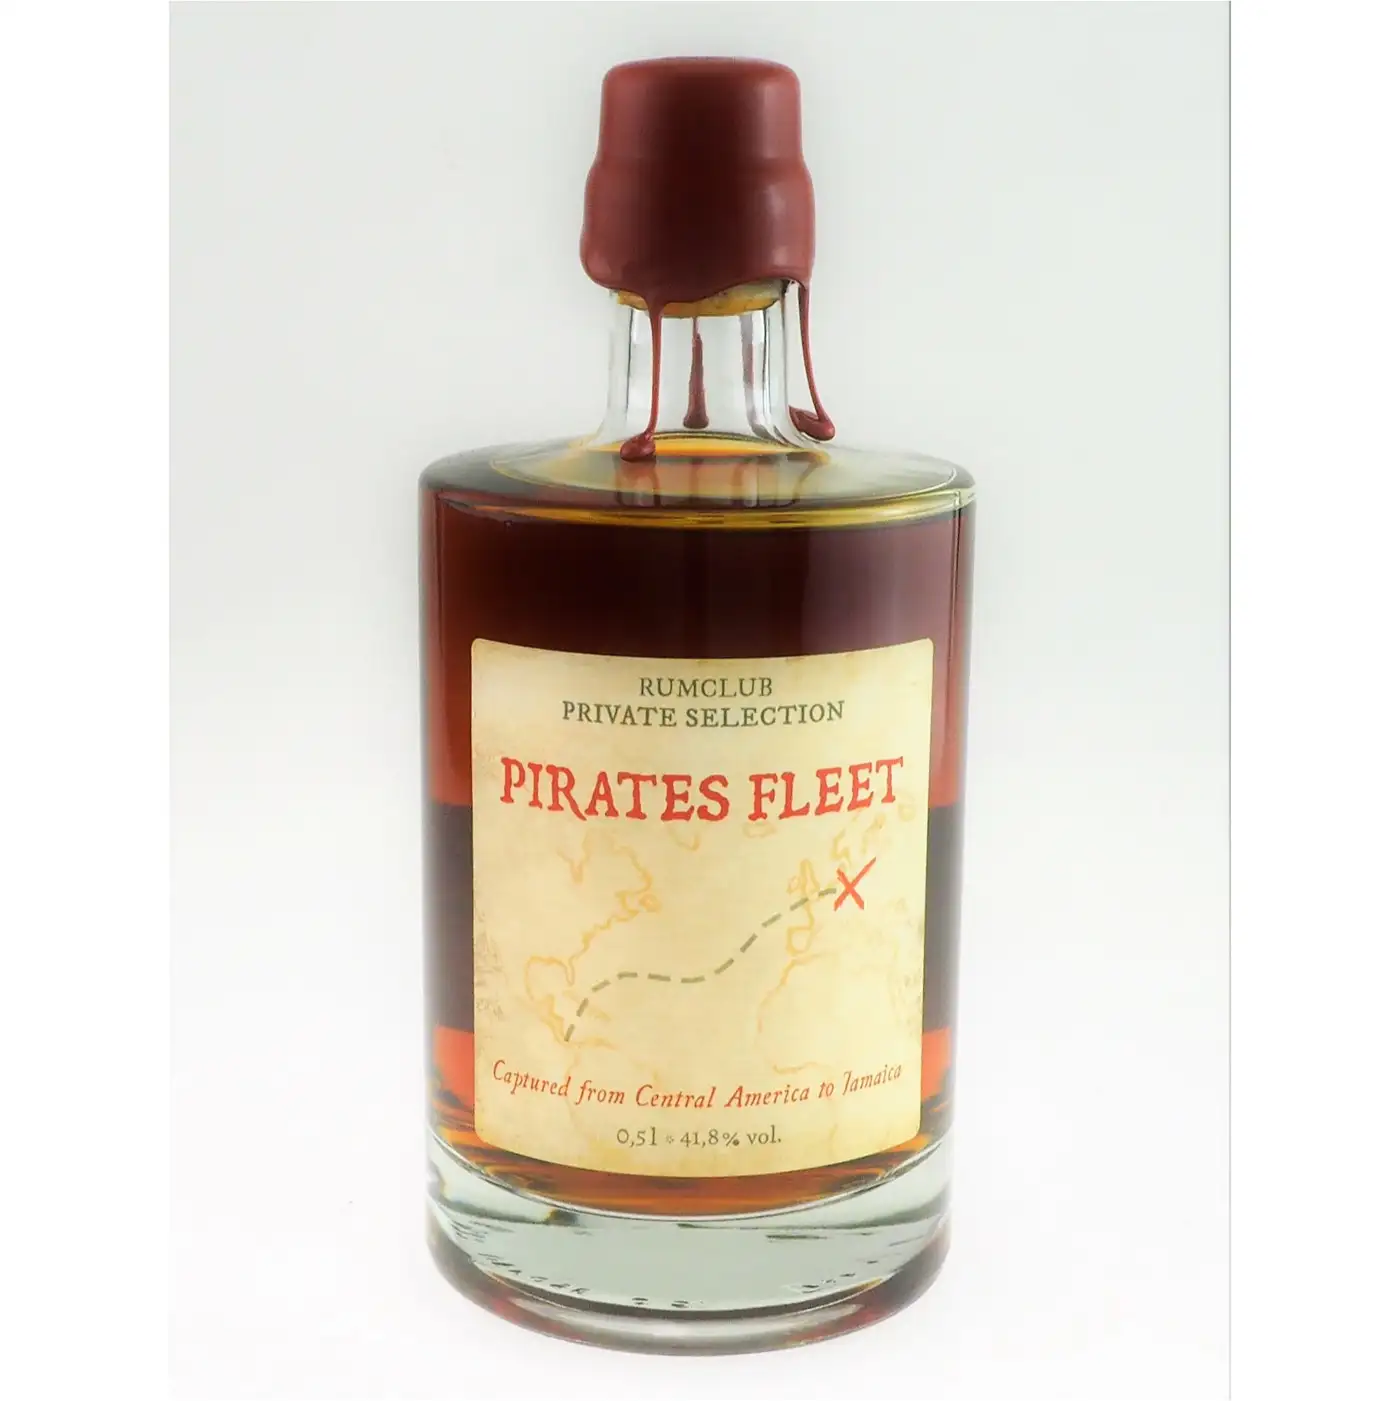 Image of the front of the bottle of the rum Rumclub Private Selection Pirates Fleet